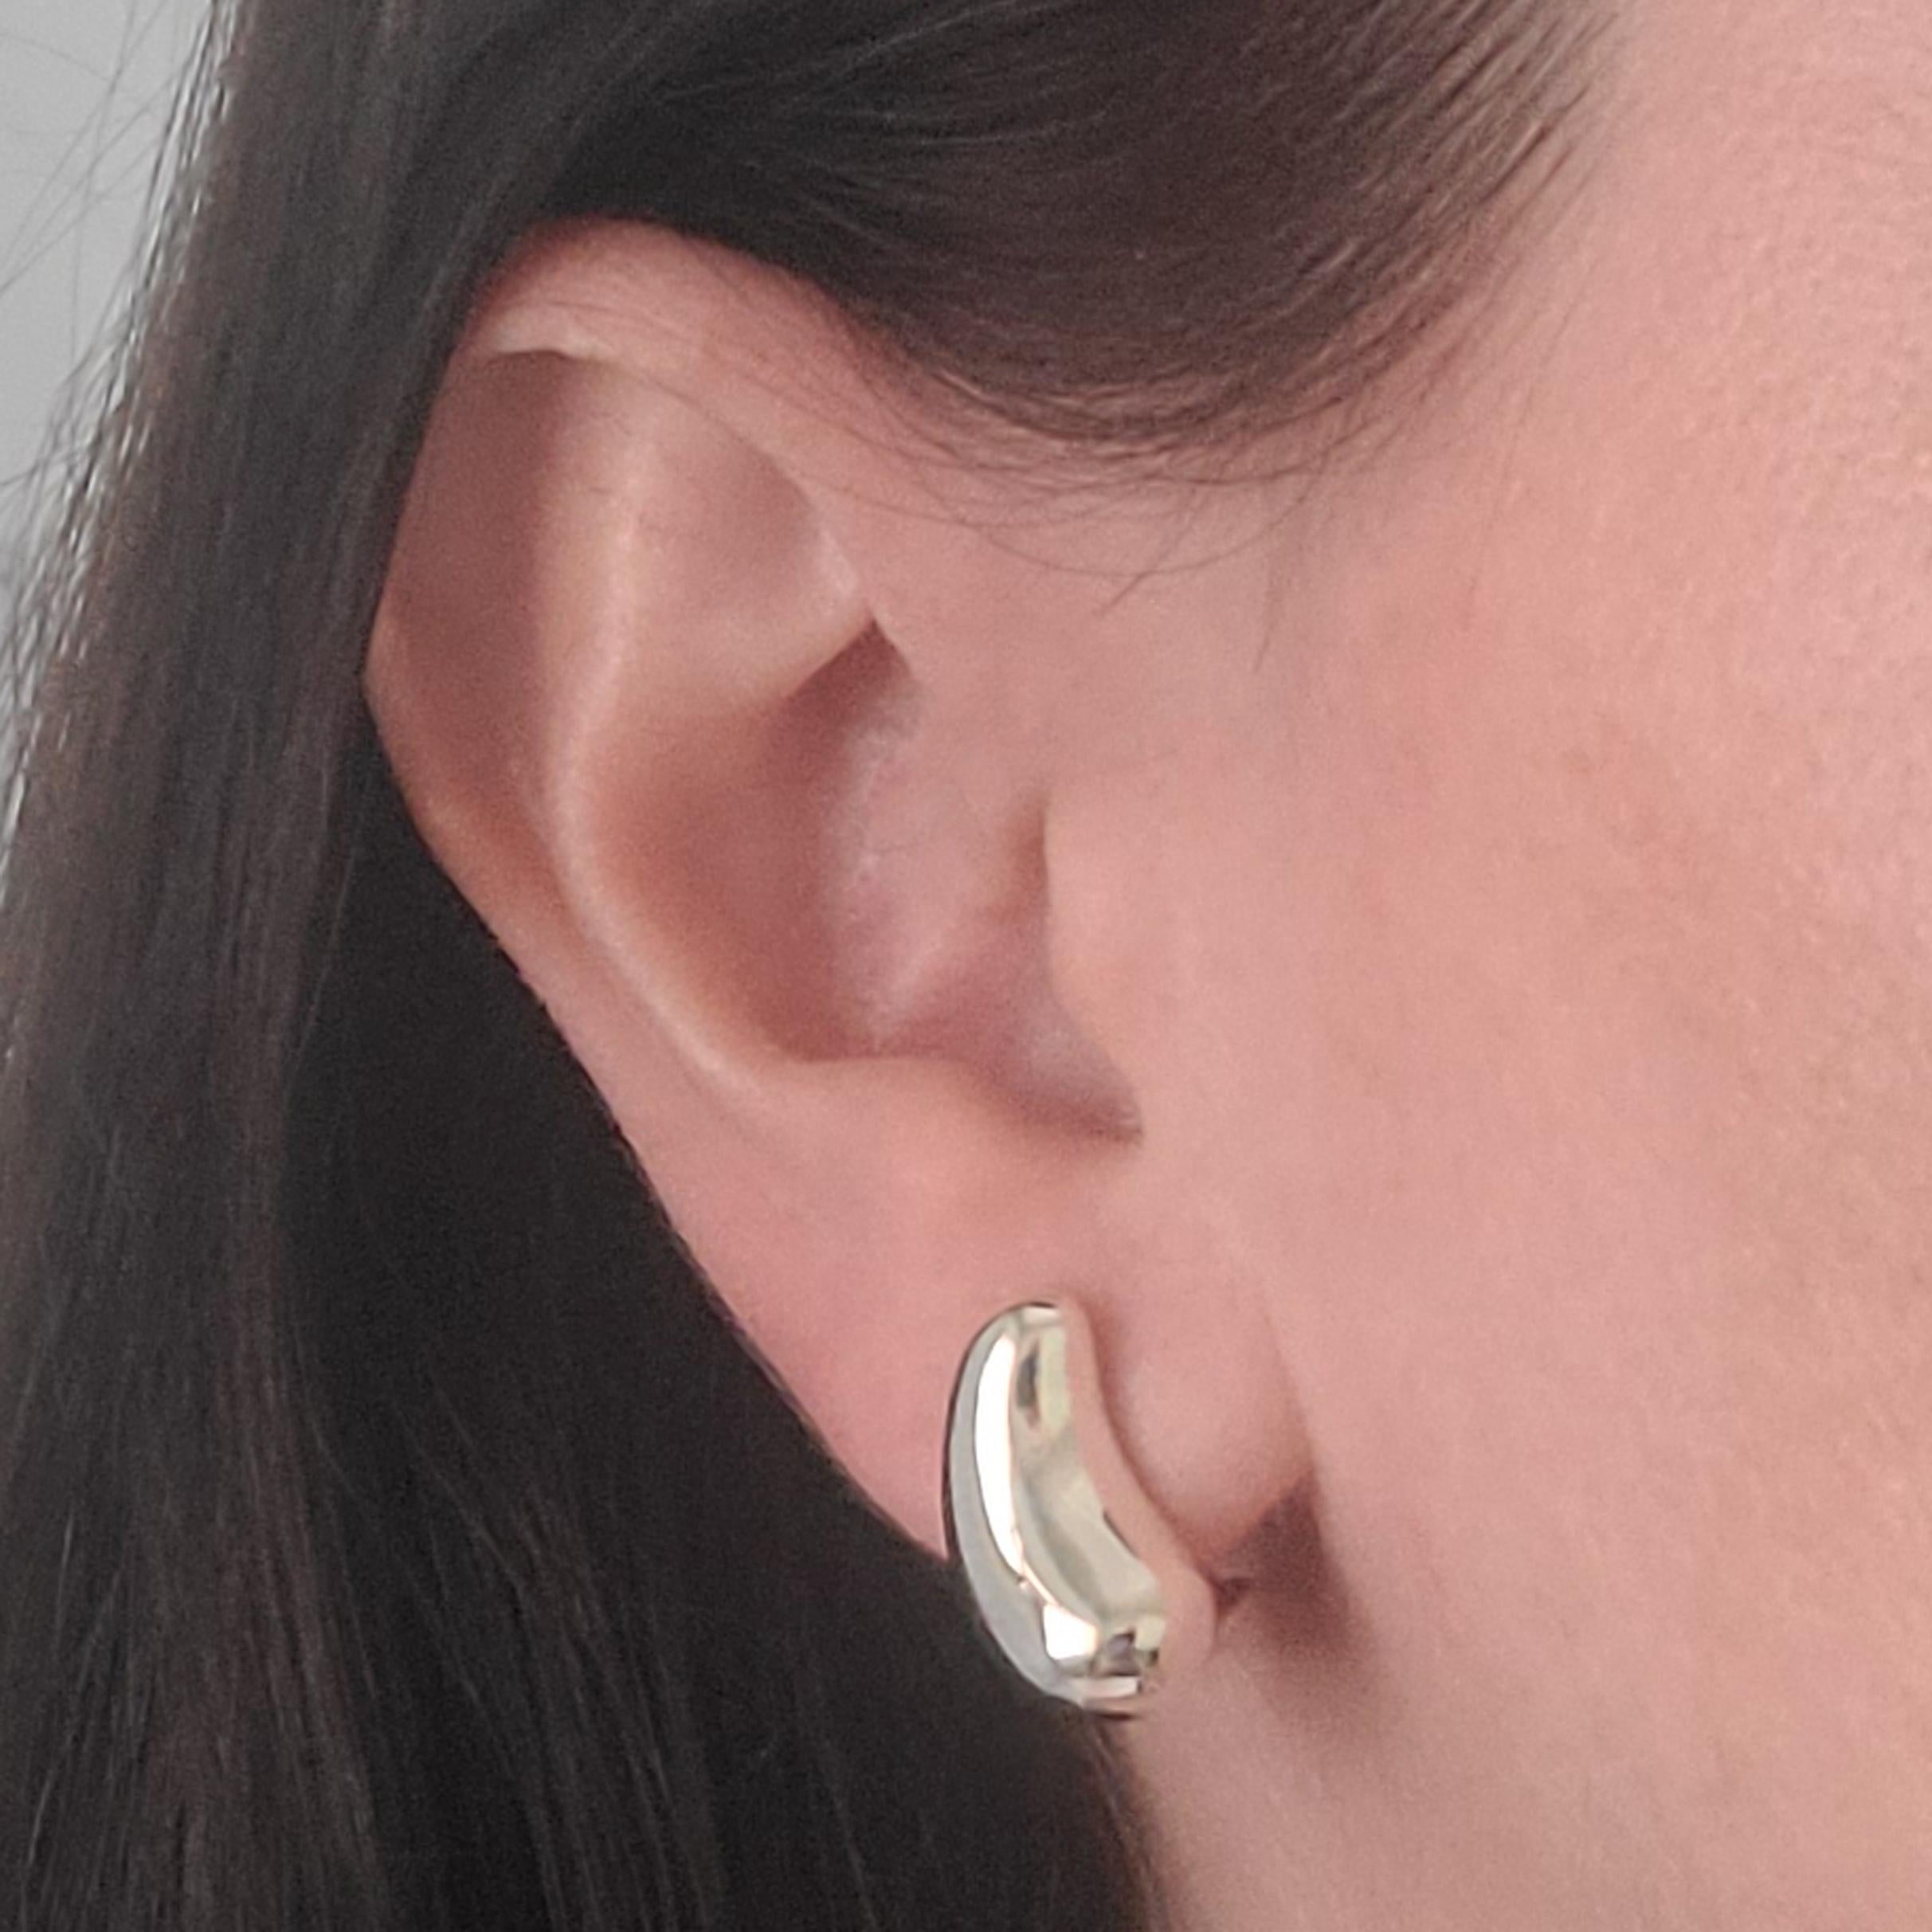 Elsa Peretti for Tiffany and Co Sterling Silver Tear Drop Earrings. Original MSRP $375. Pierced Post With Omega Clip Back. Post Removed Upon Request. Includes Tiffany Pouch.